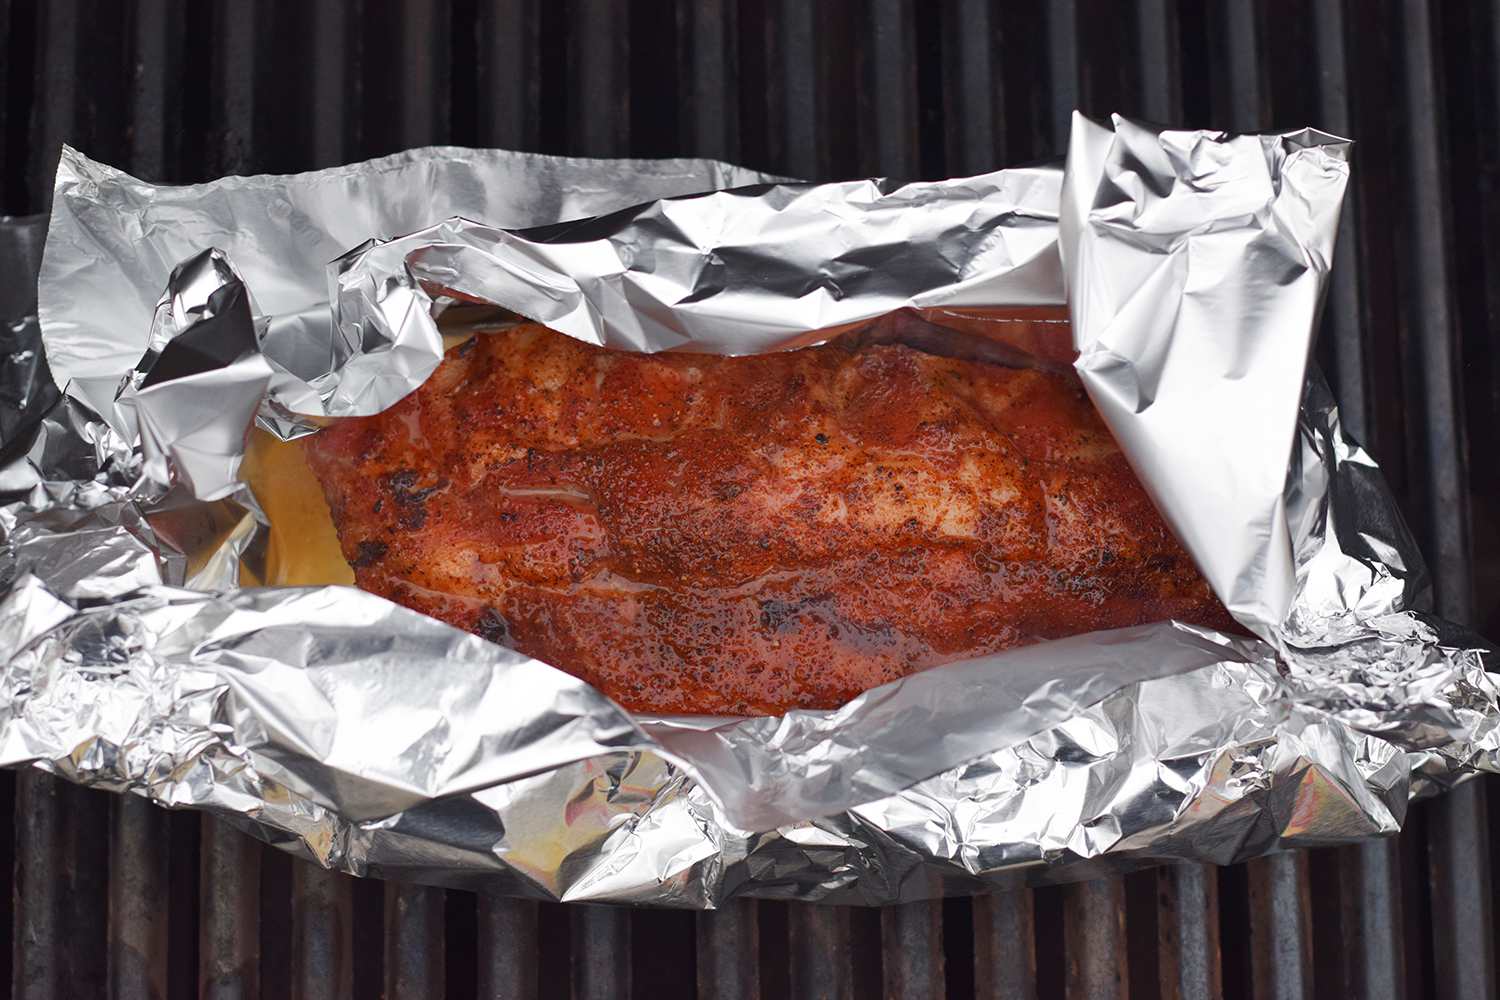 https://recipes.net/wp-content/uploads/2023/12/how-to-cook-ribs-on-gas-grill-in-foil-indirect-heat-1701782141.jpg